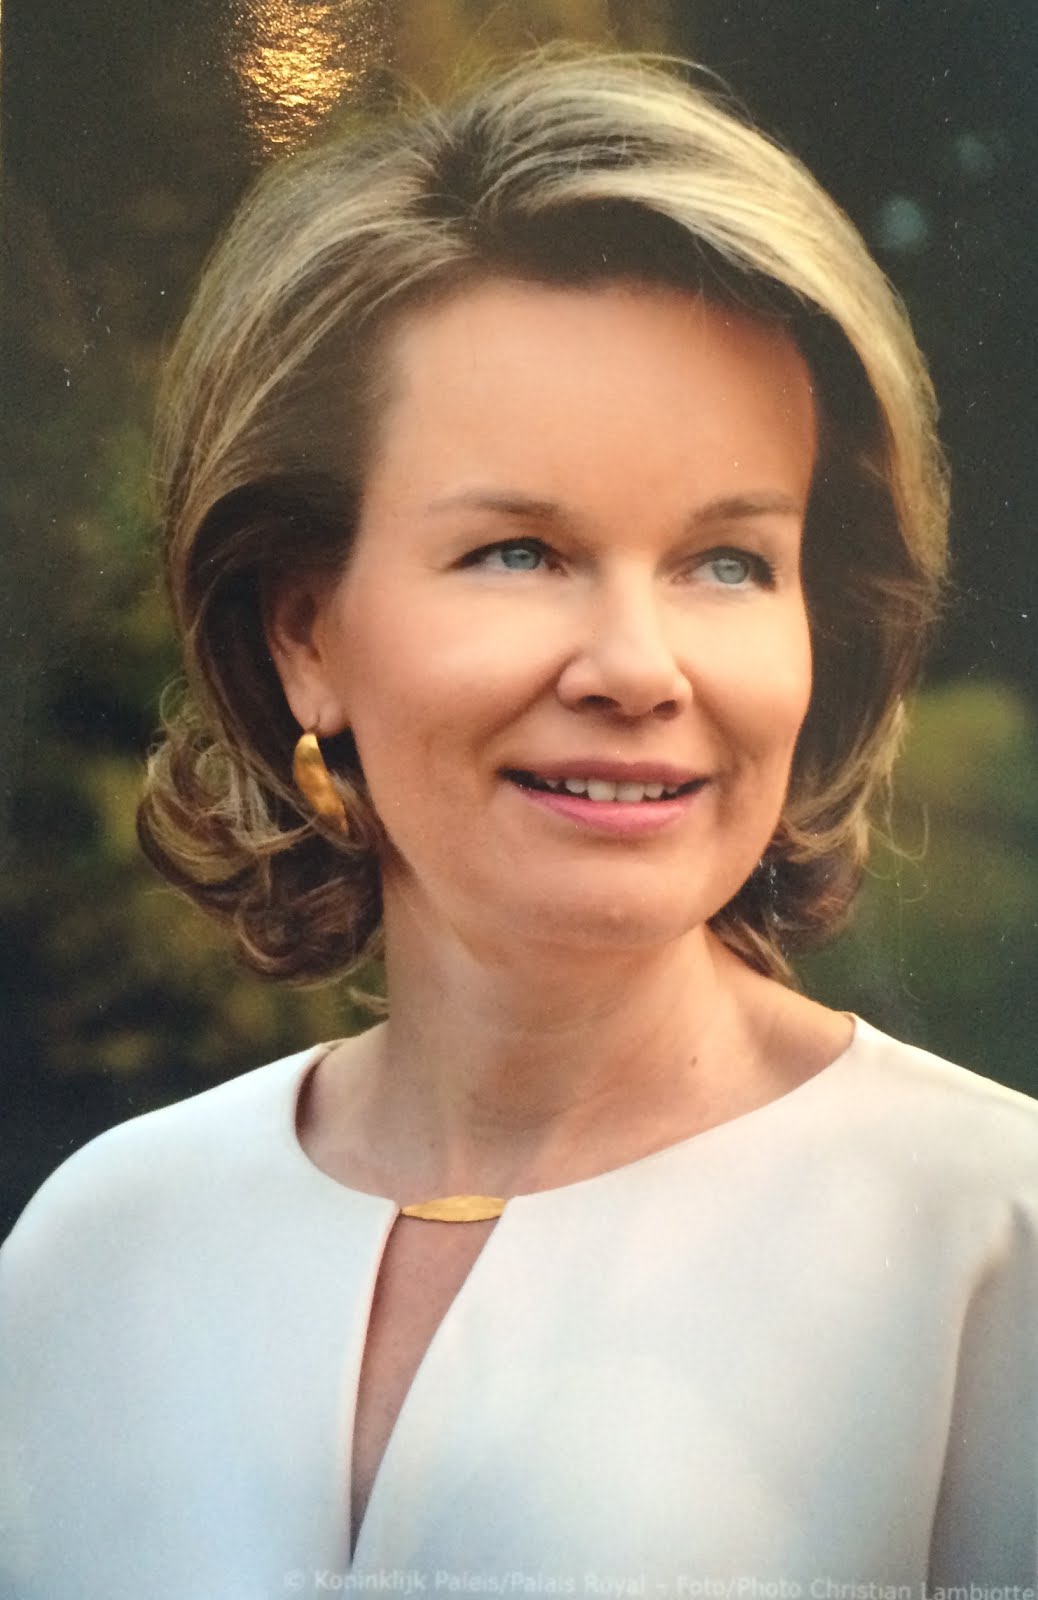 Queen Mathilde of Belgium dazzles in a tiara packed with 